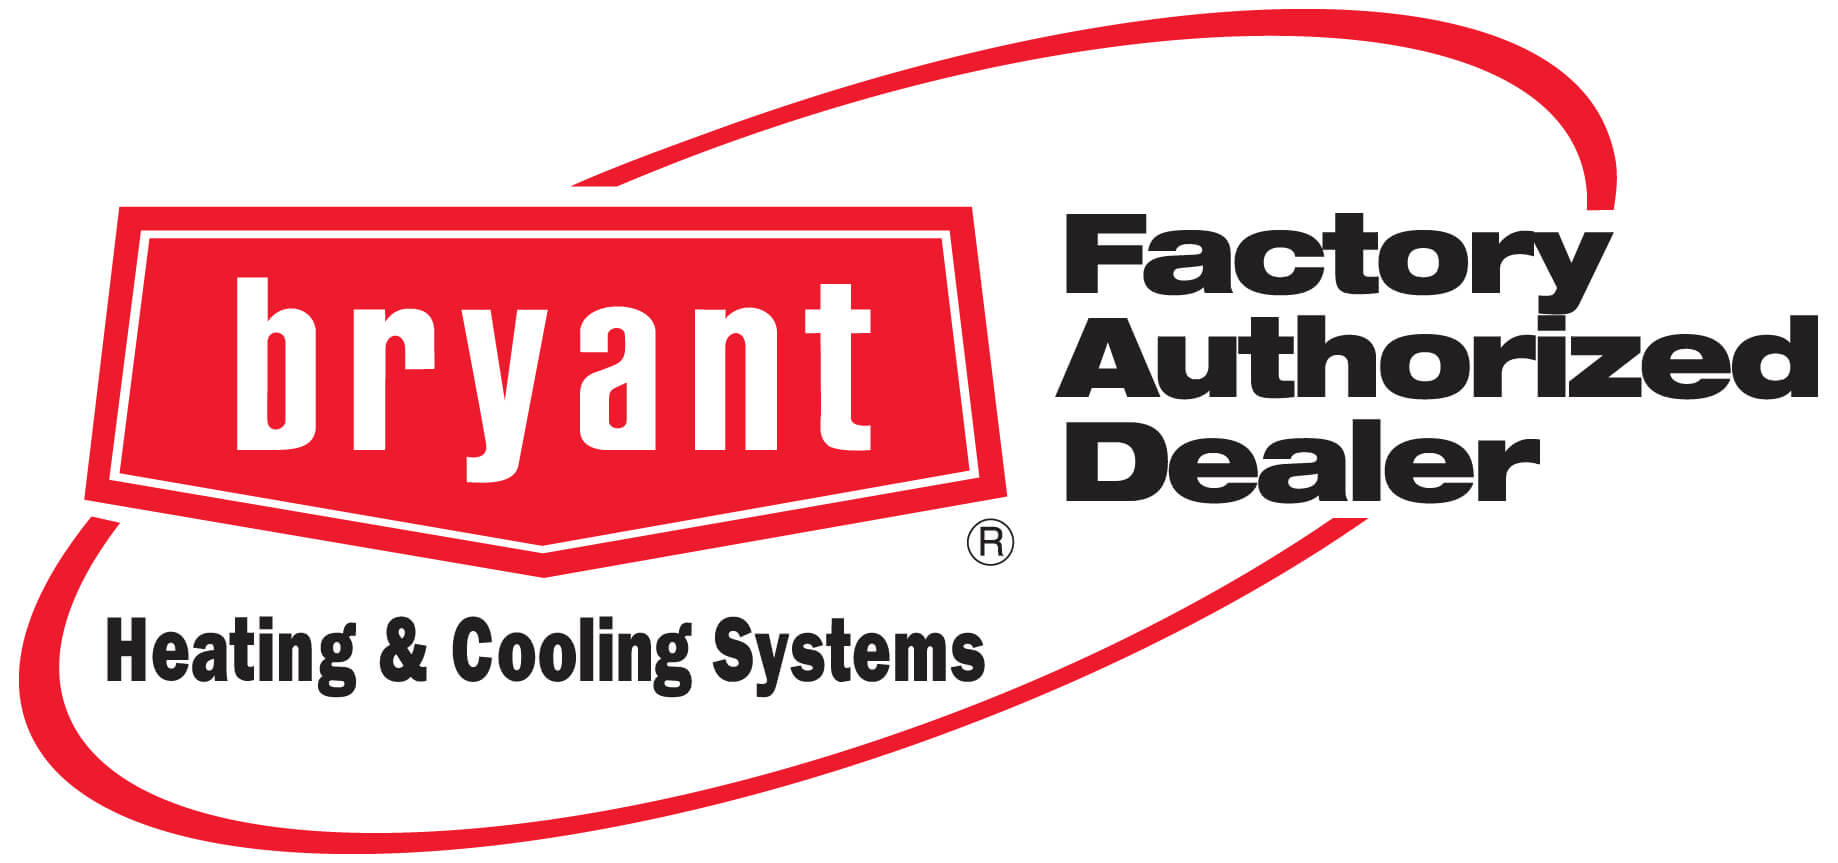 BRG Air Systems LLC works with Bryant Heating and Cooling Systems ACs in Palm Bay FL.